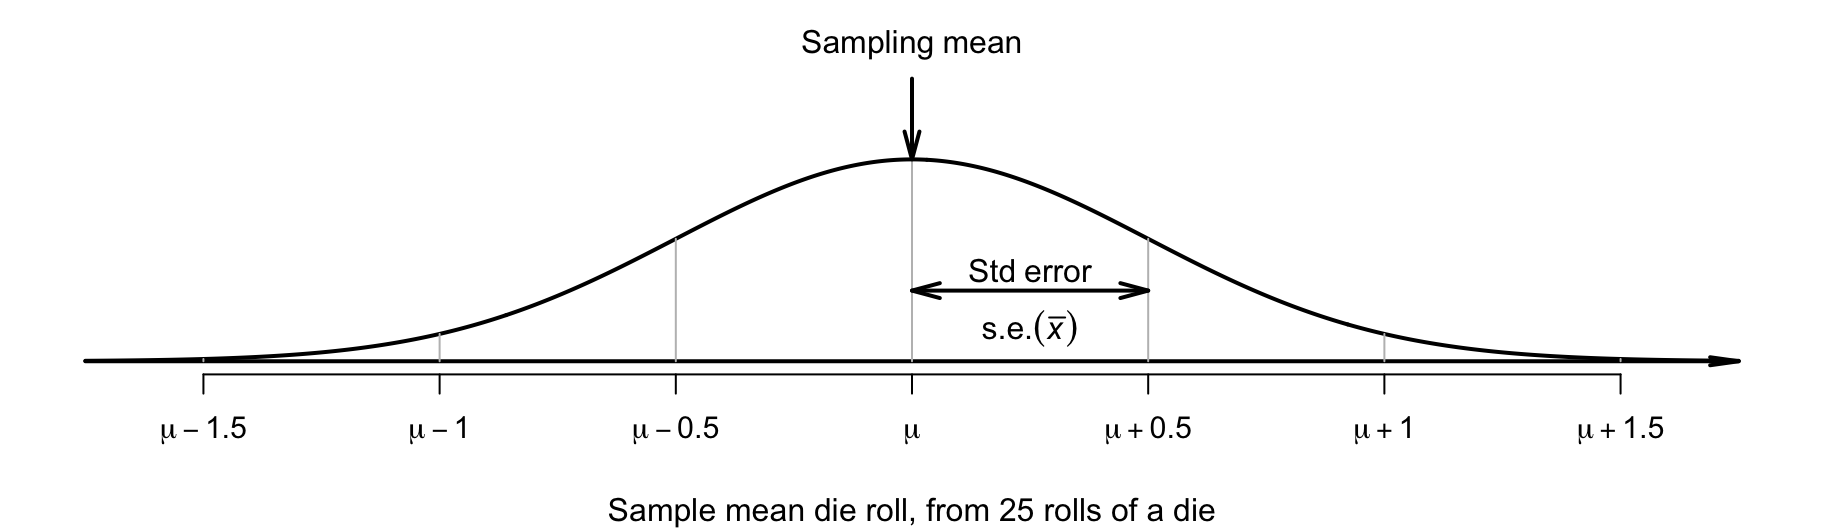 The sampling distribution is a normal distribution; it shows how the sample mean of 25 die rolls varies in samples of size $n = 25$